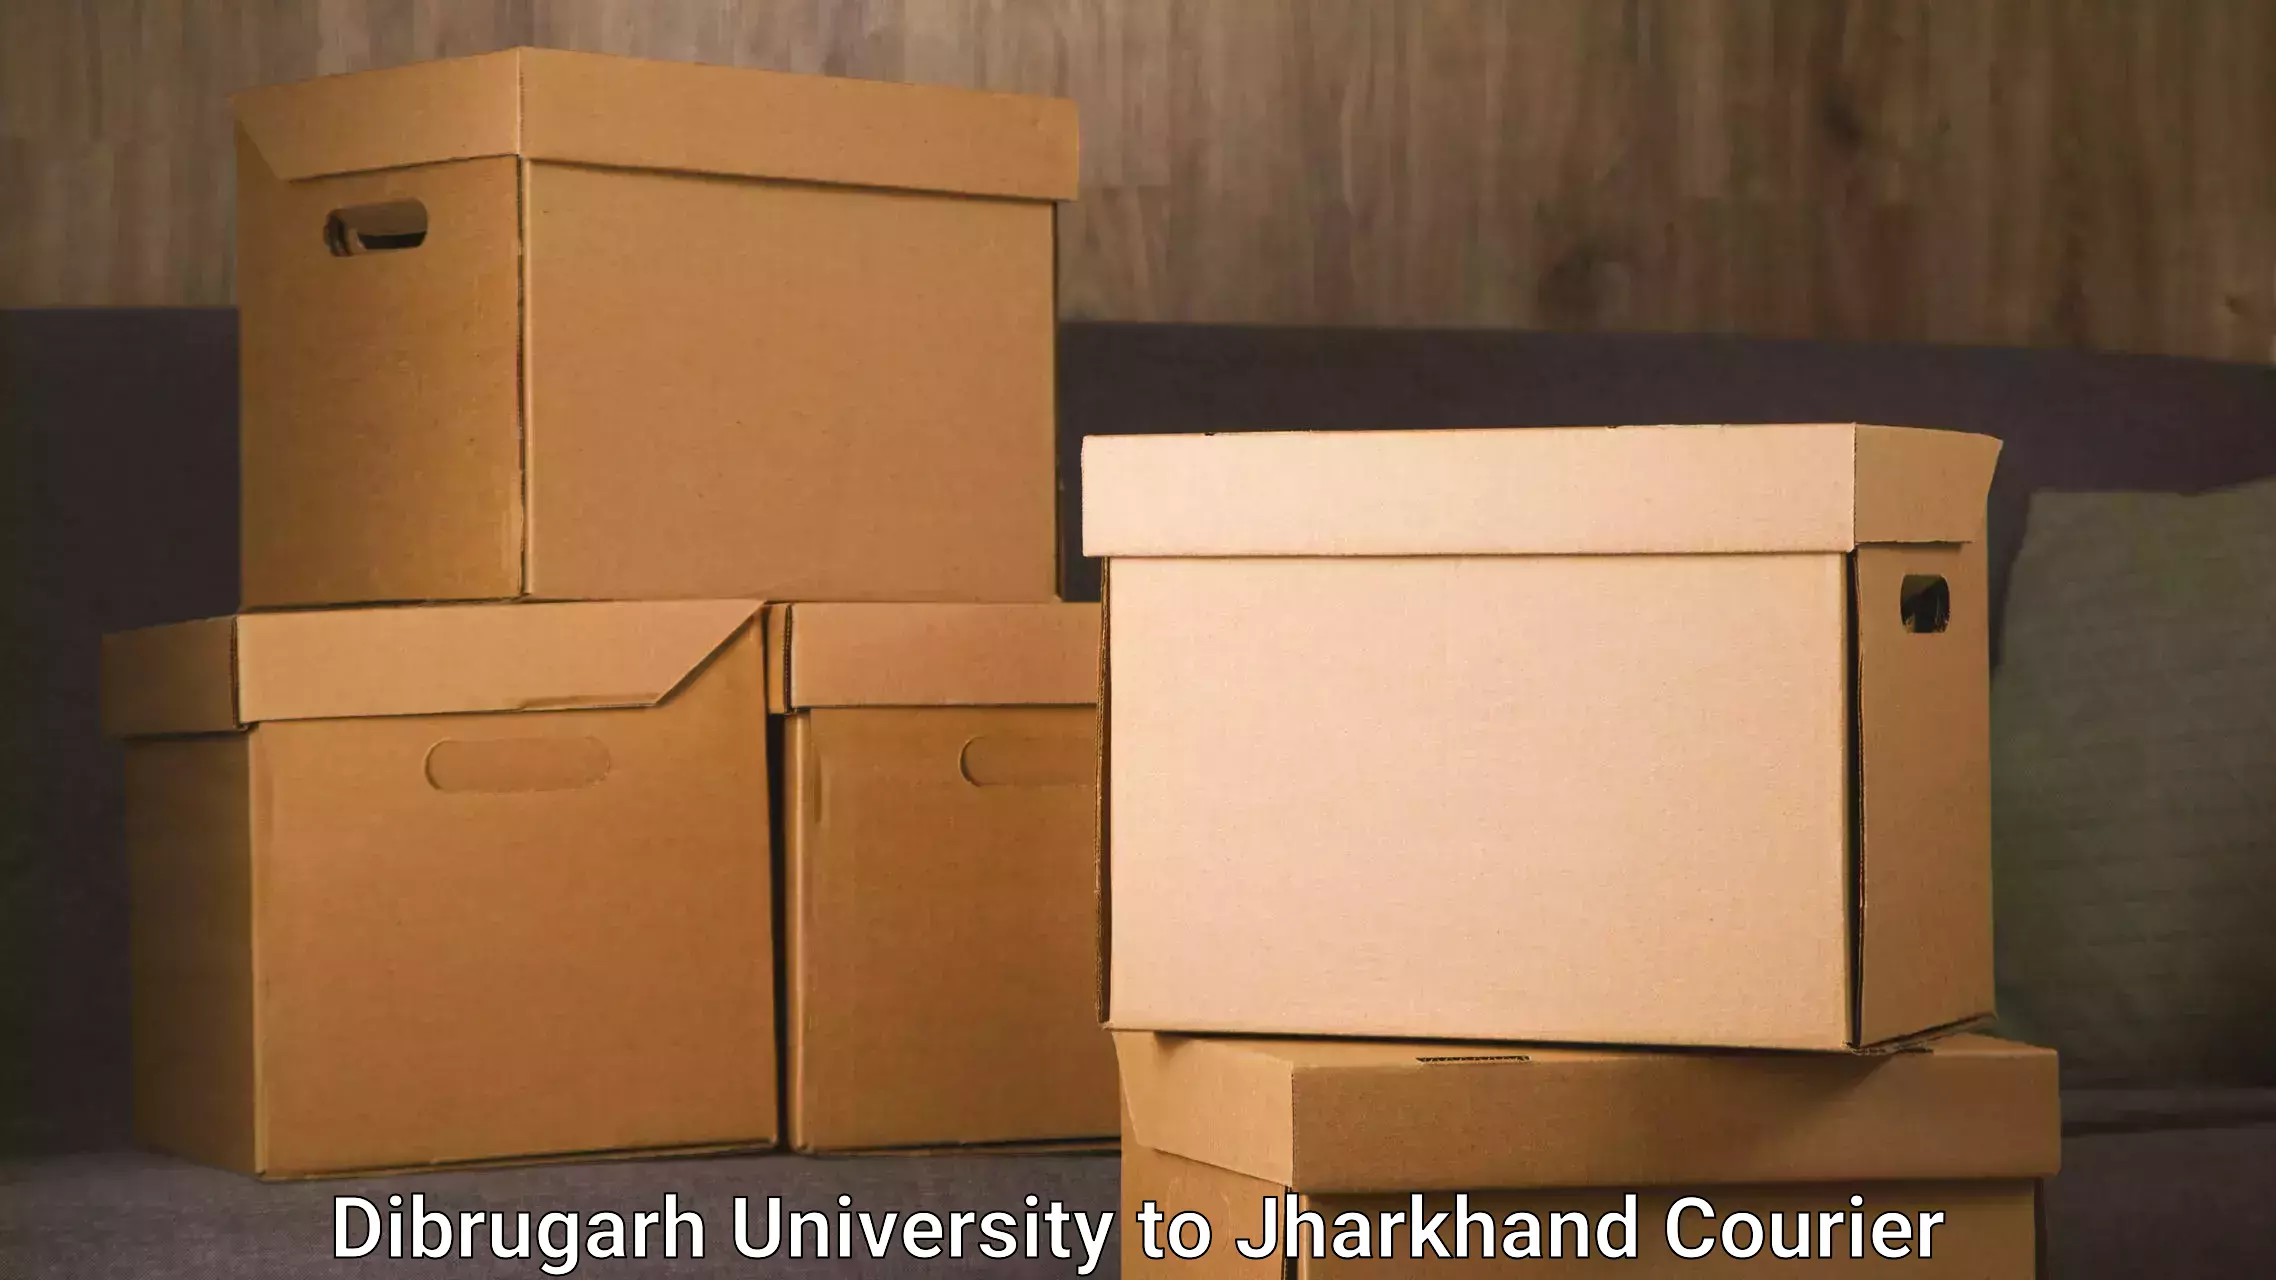 Track and trace shipping Dibrugarh University to Dhanbad